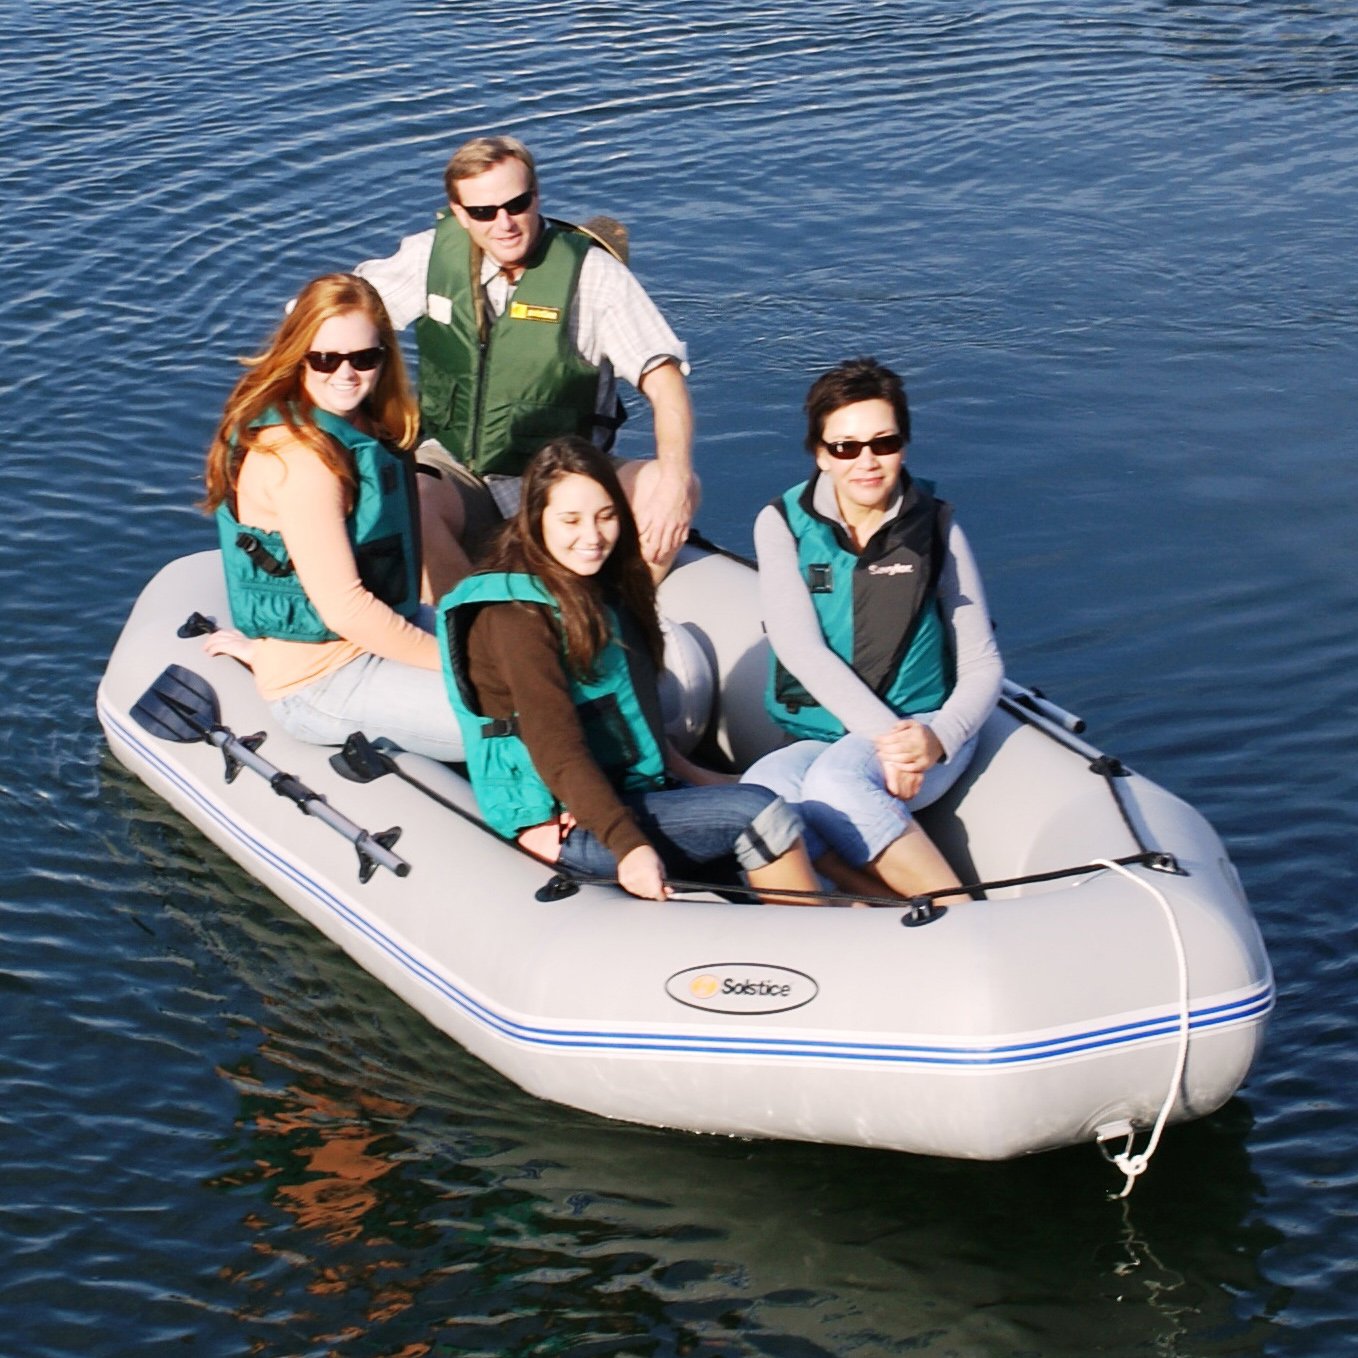 Solstice 20361 12 ft. Quest Inflatable Boat Set - image 2 of 2